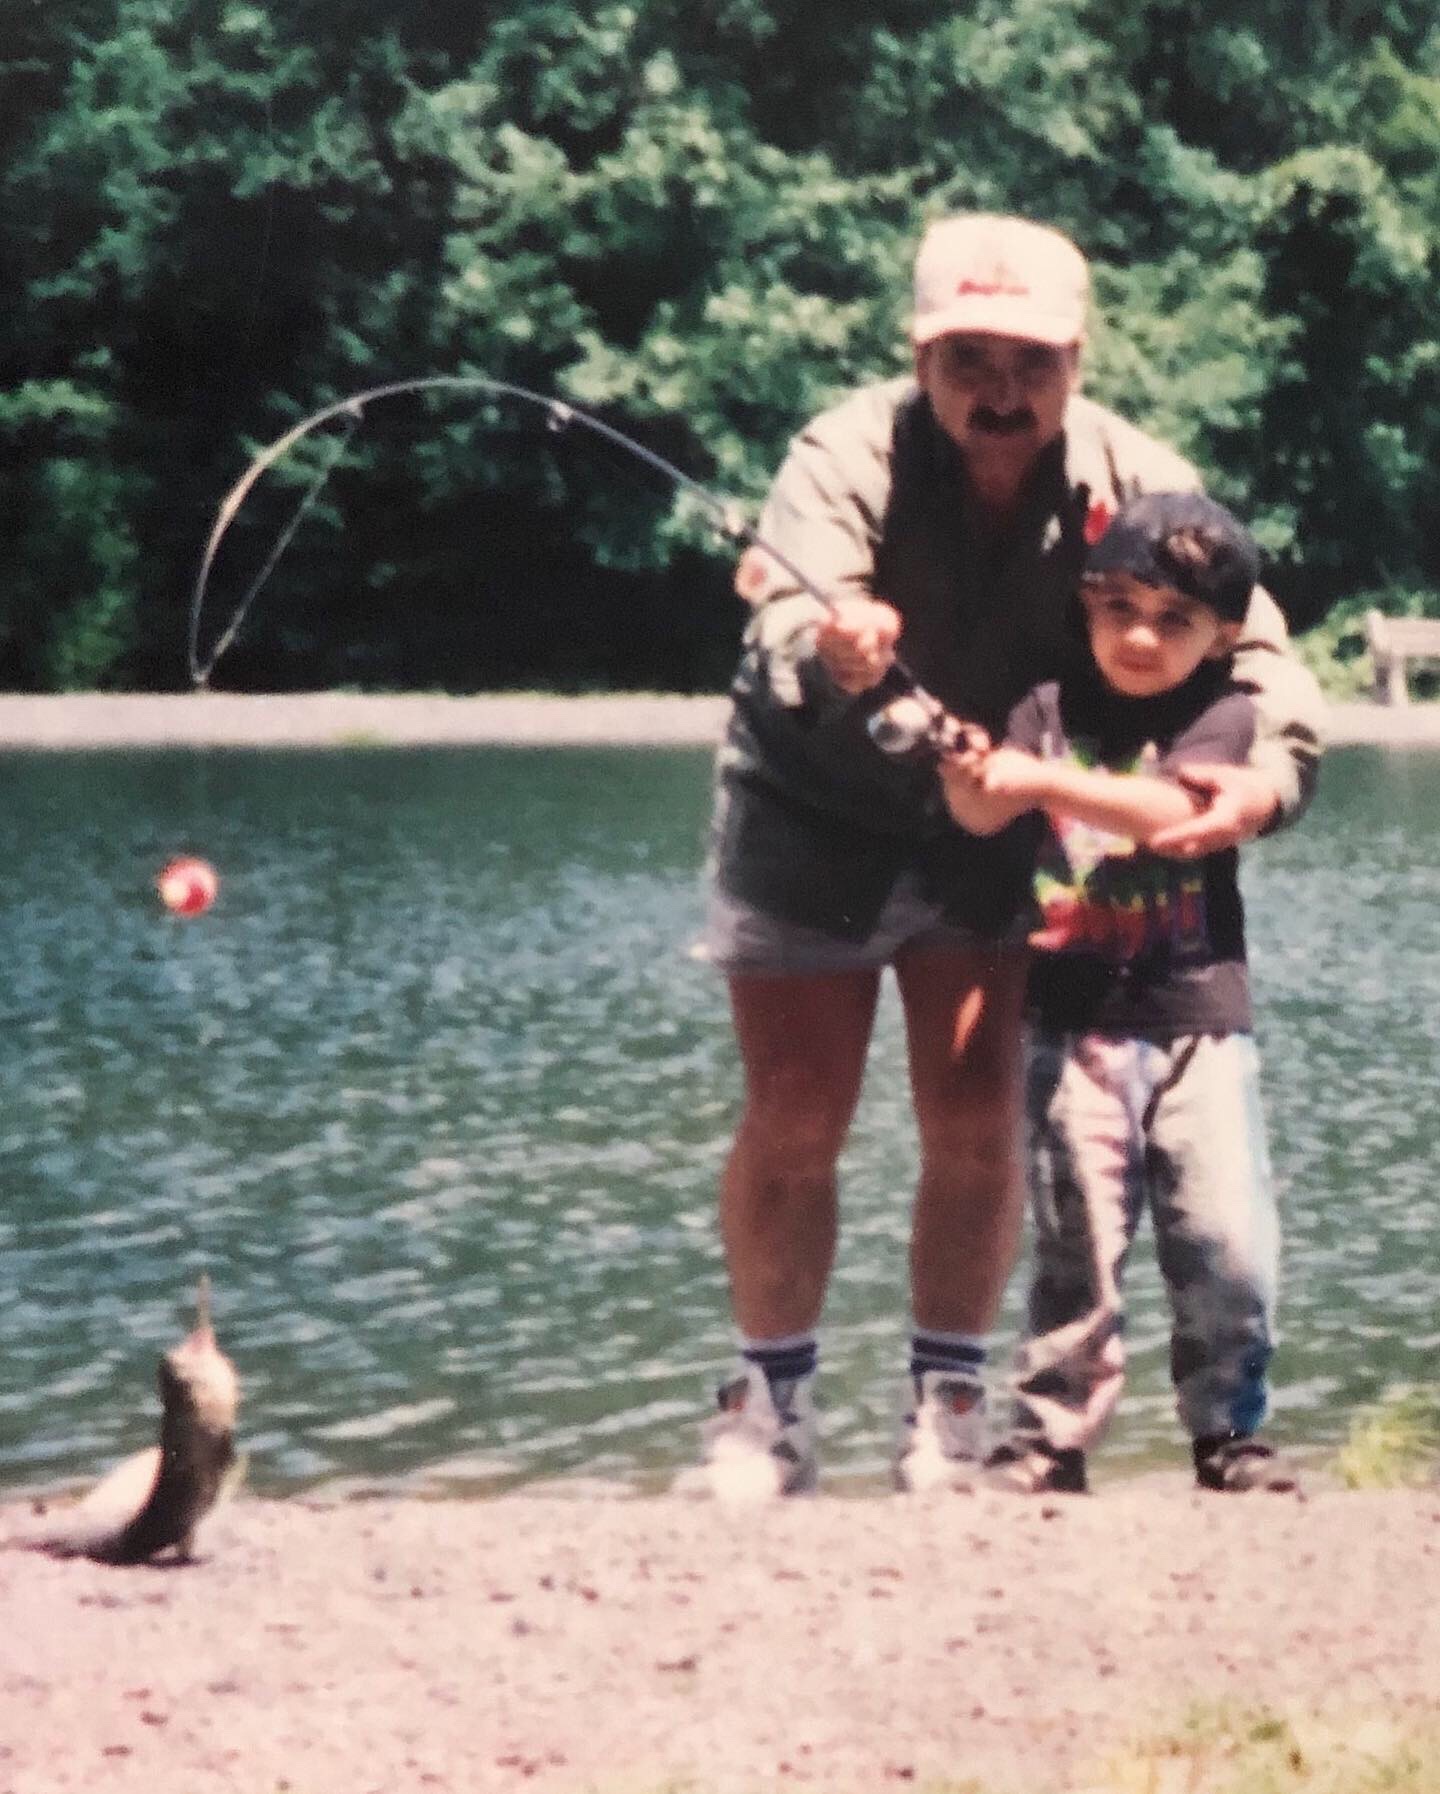 Carving a family tradition: Minnesota father, son create fishing